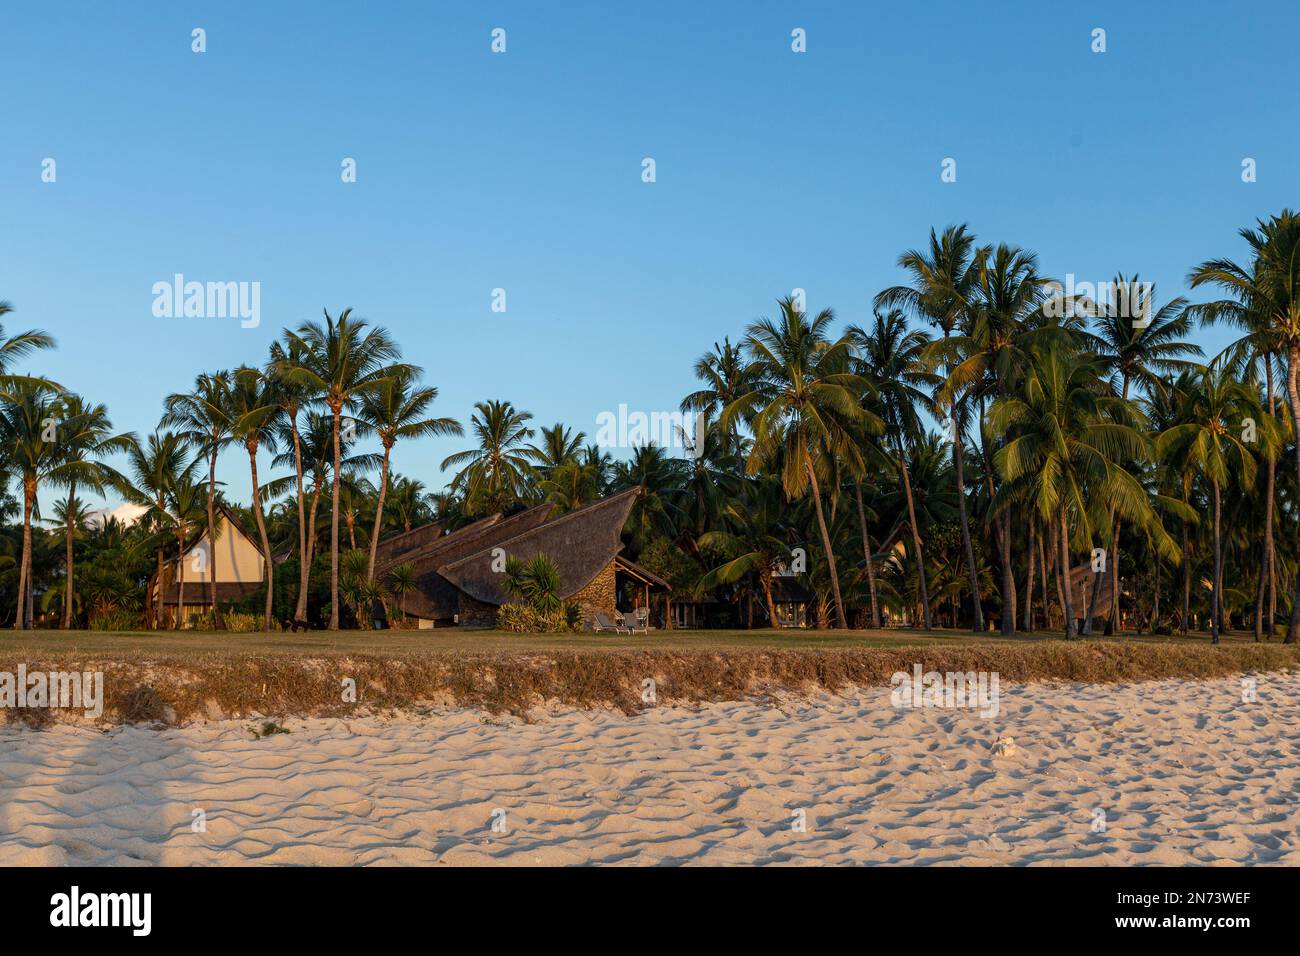 Some houses at the beach of flic en flac at mauritius island, africa Stock Photo